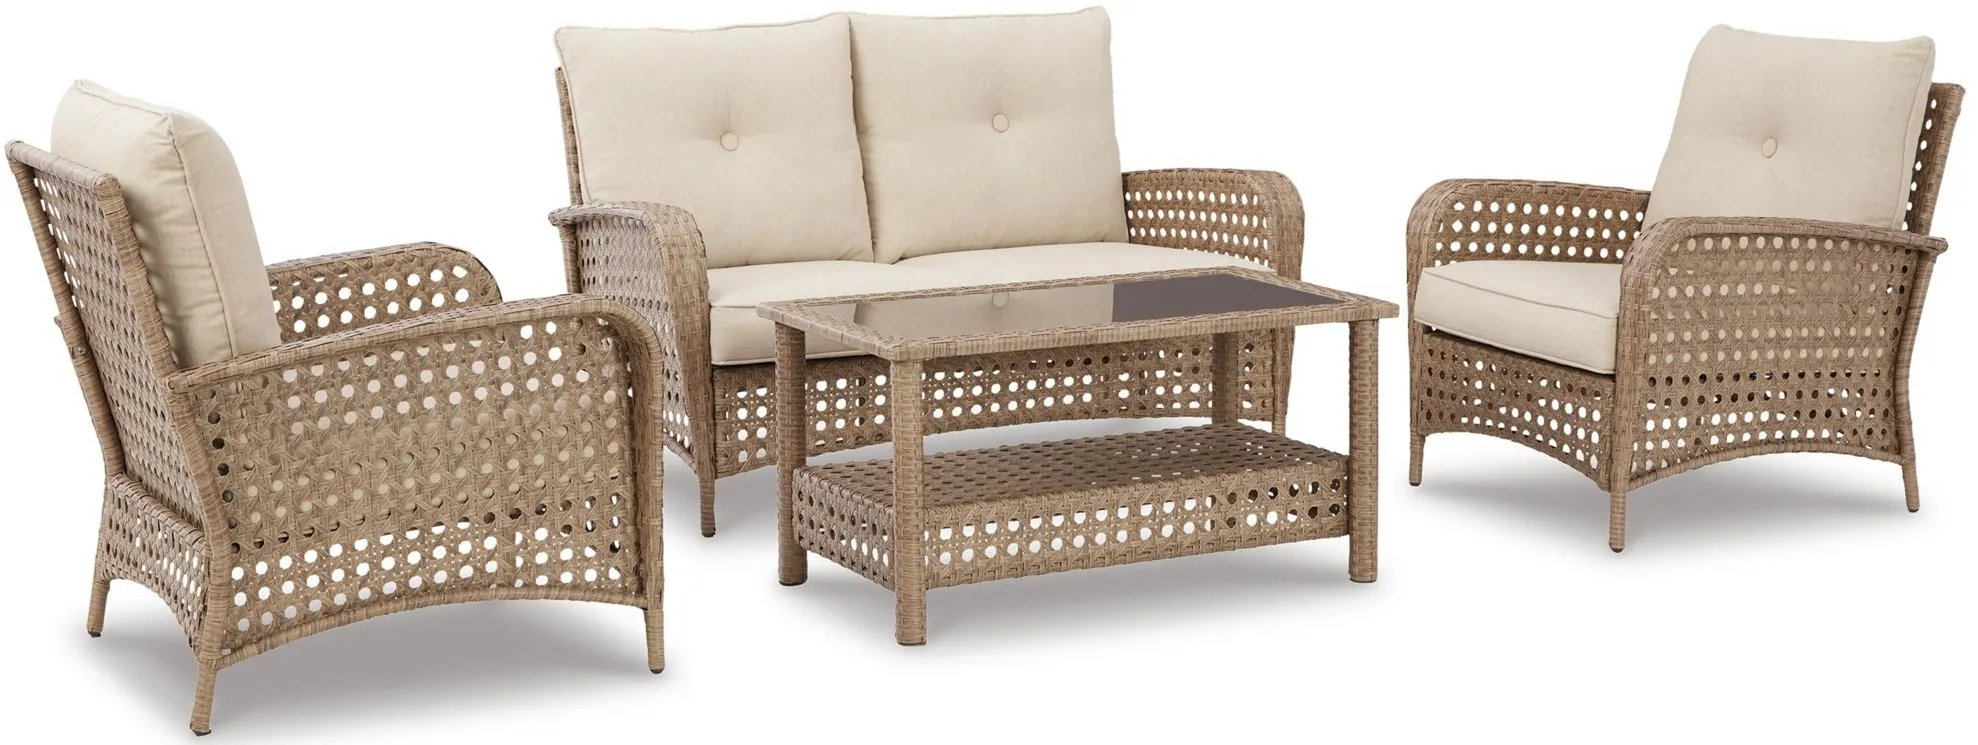 Braylee Outdoor Set -3pc. in Brown by Ashley Furniture